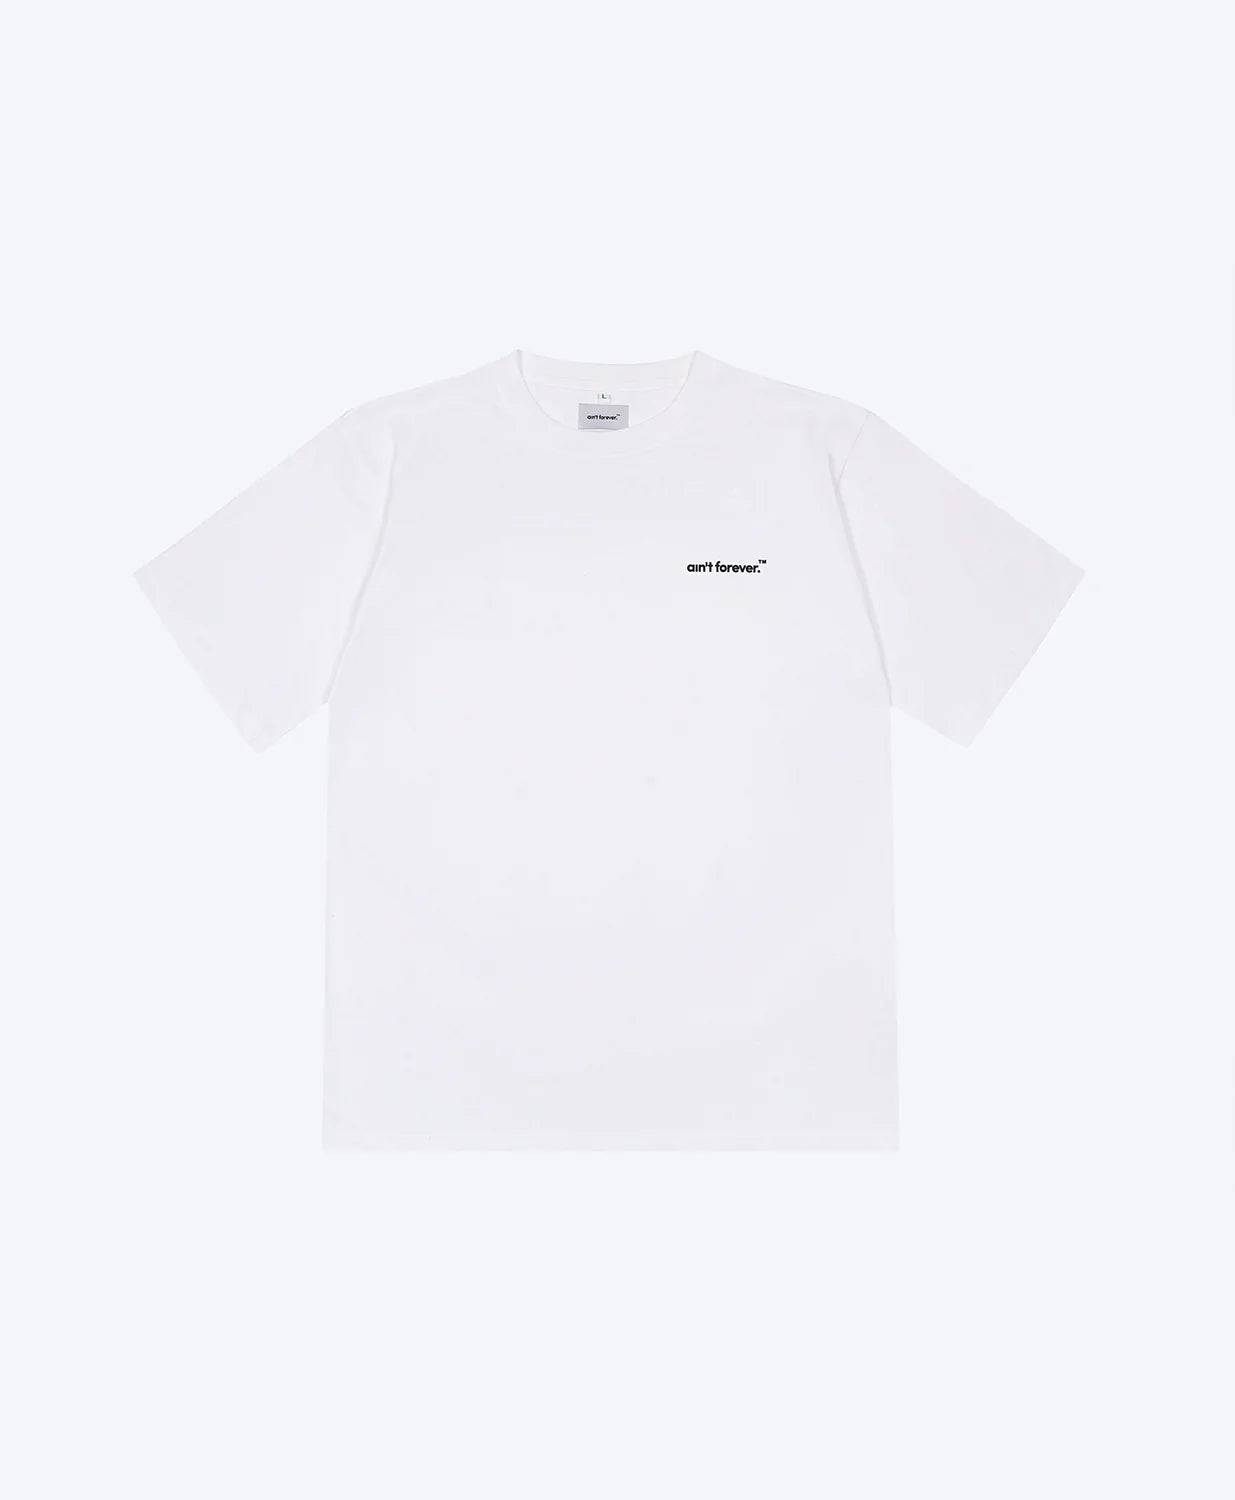 THE BOARDING PASS T-SHIRT (WHITE / LAVENDER)